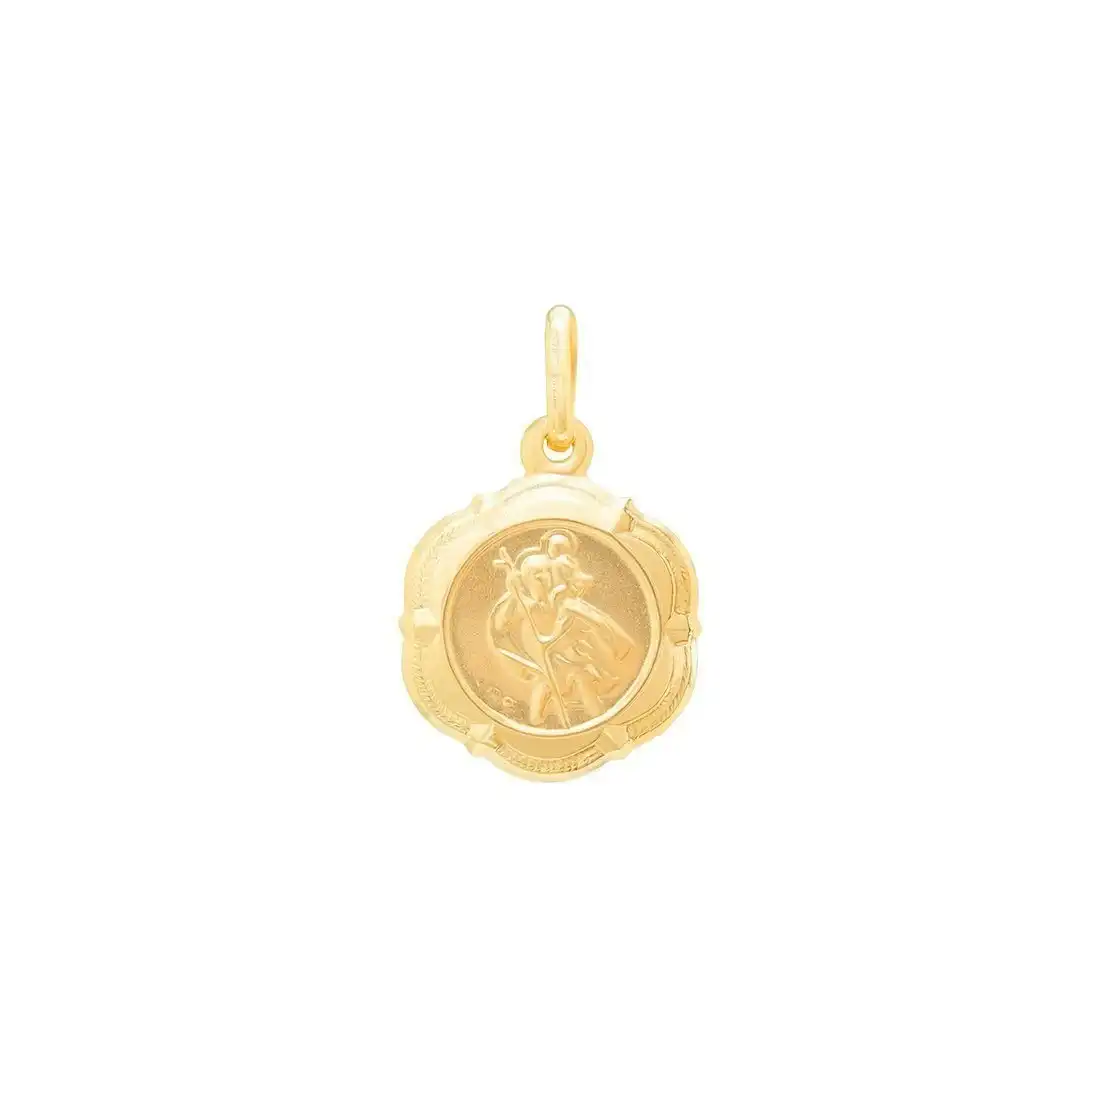 St Christopher Scalloped Edge Medal Pendant in 9ct Yellow Gold